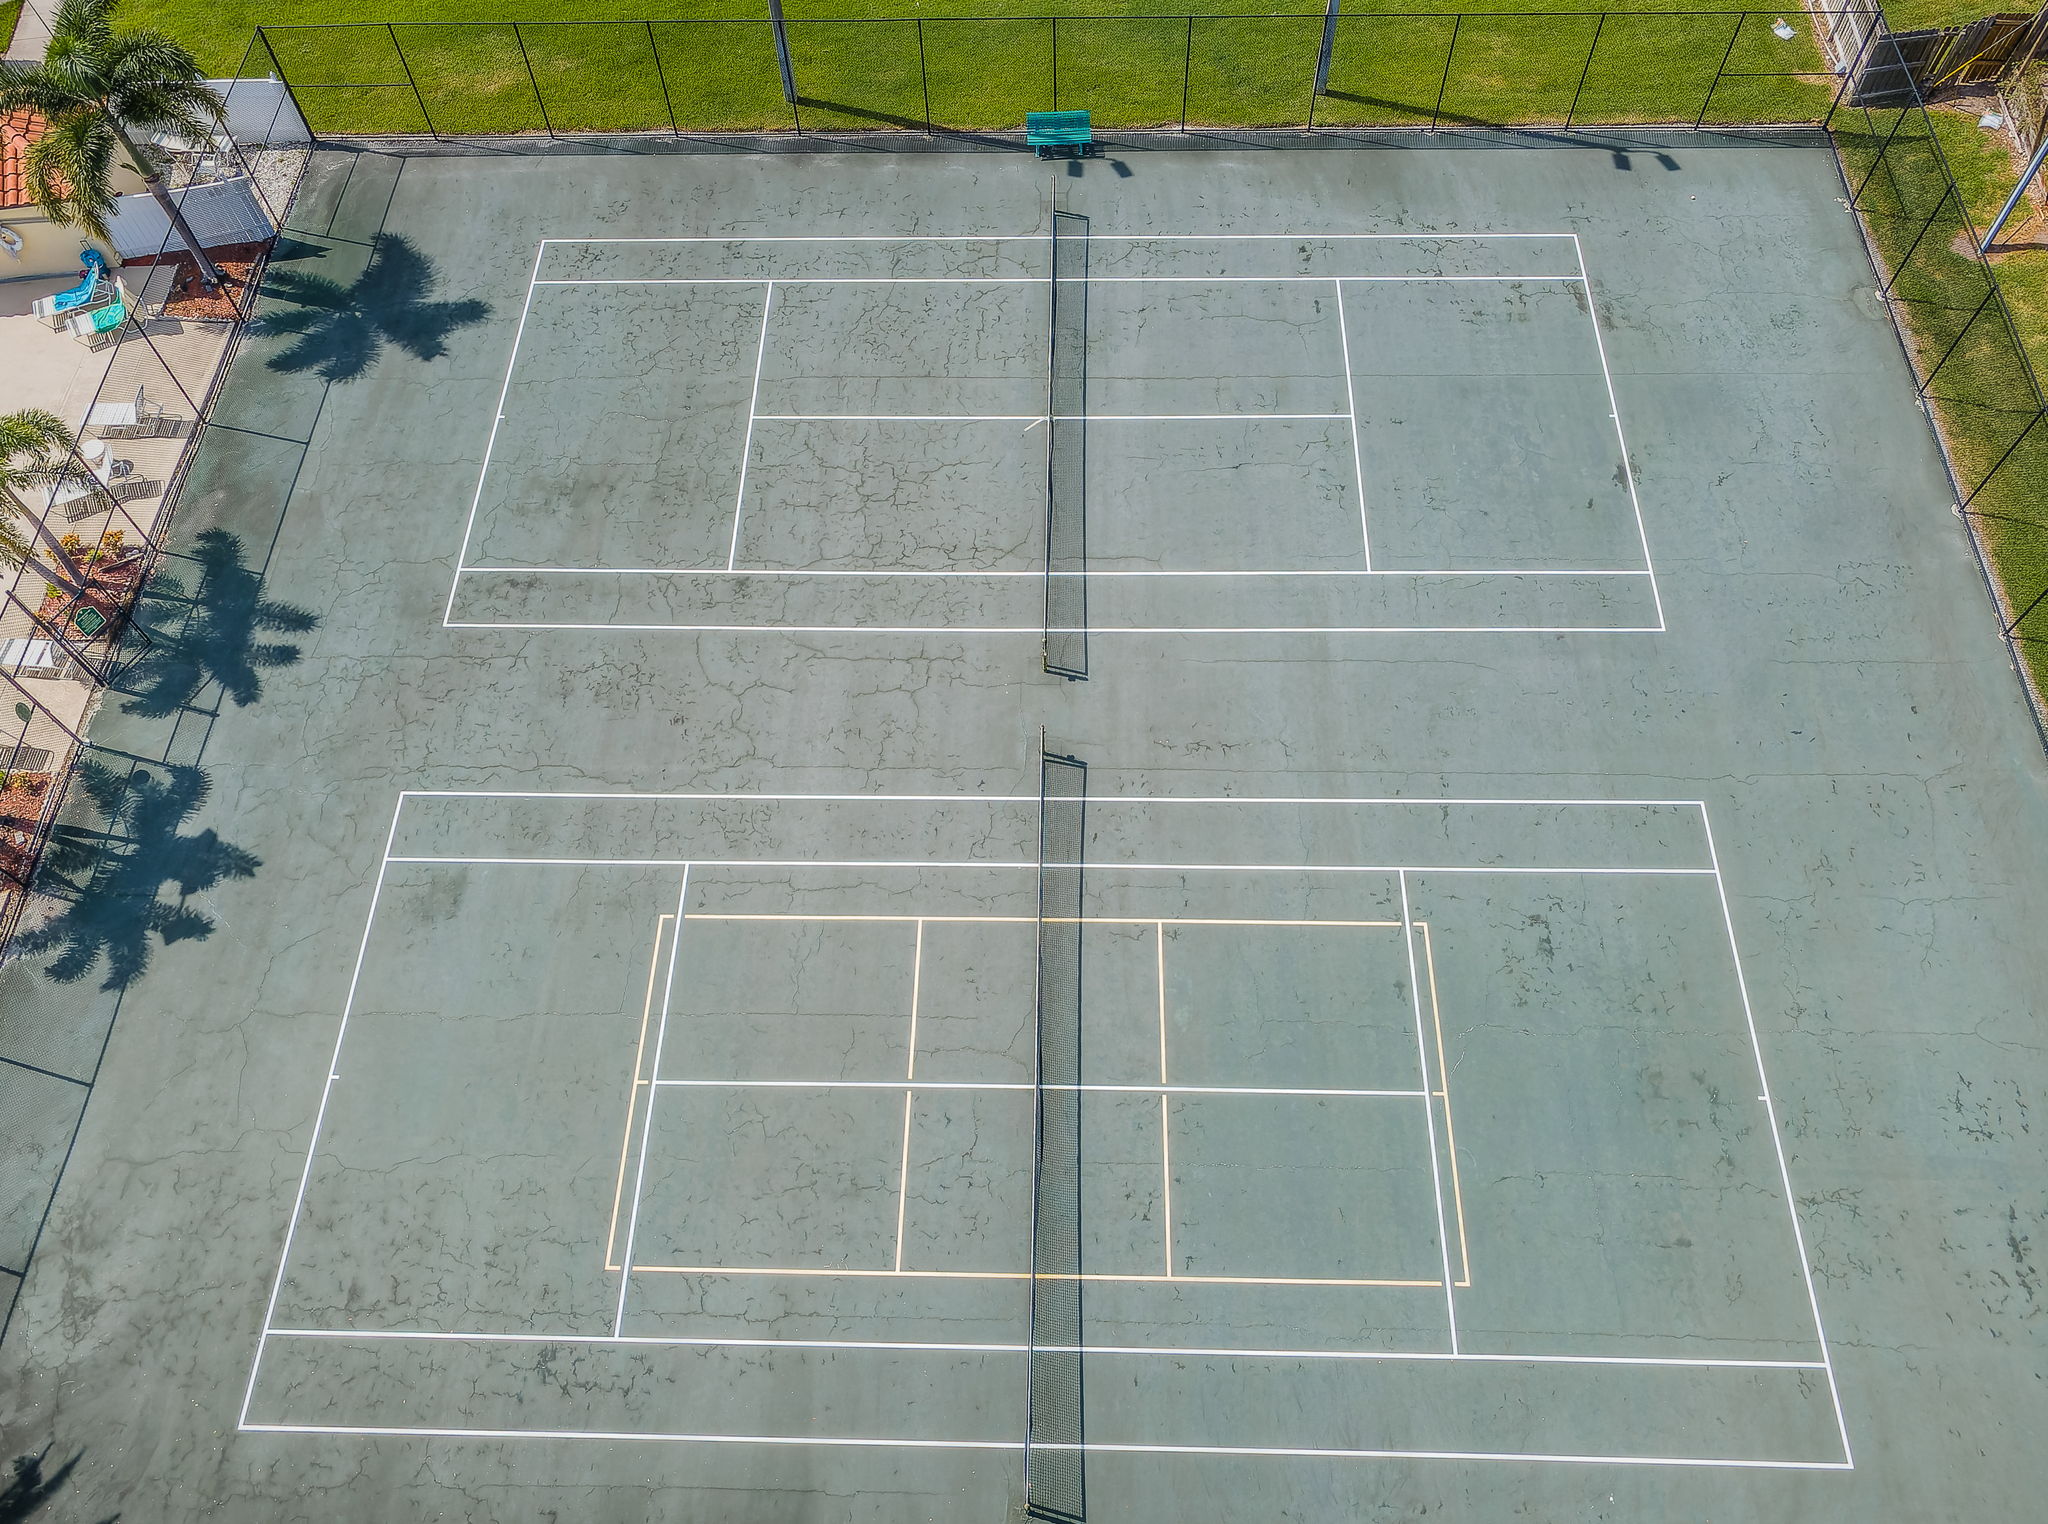 15-Tennis and Pickleball Courts